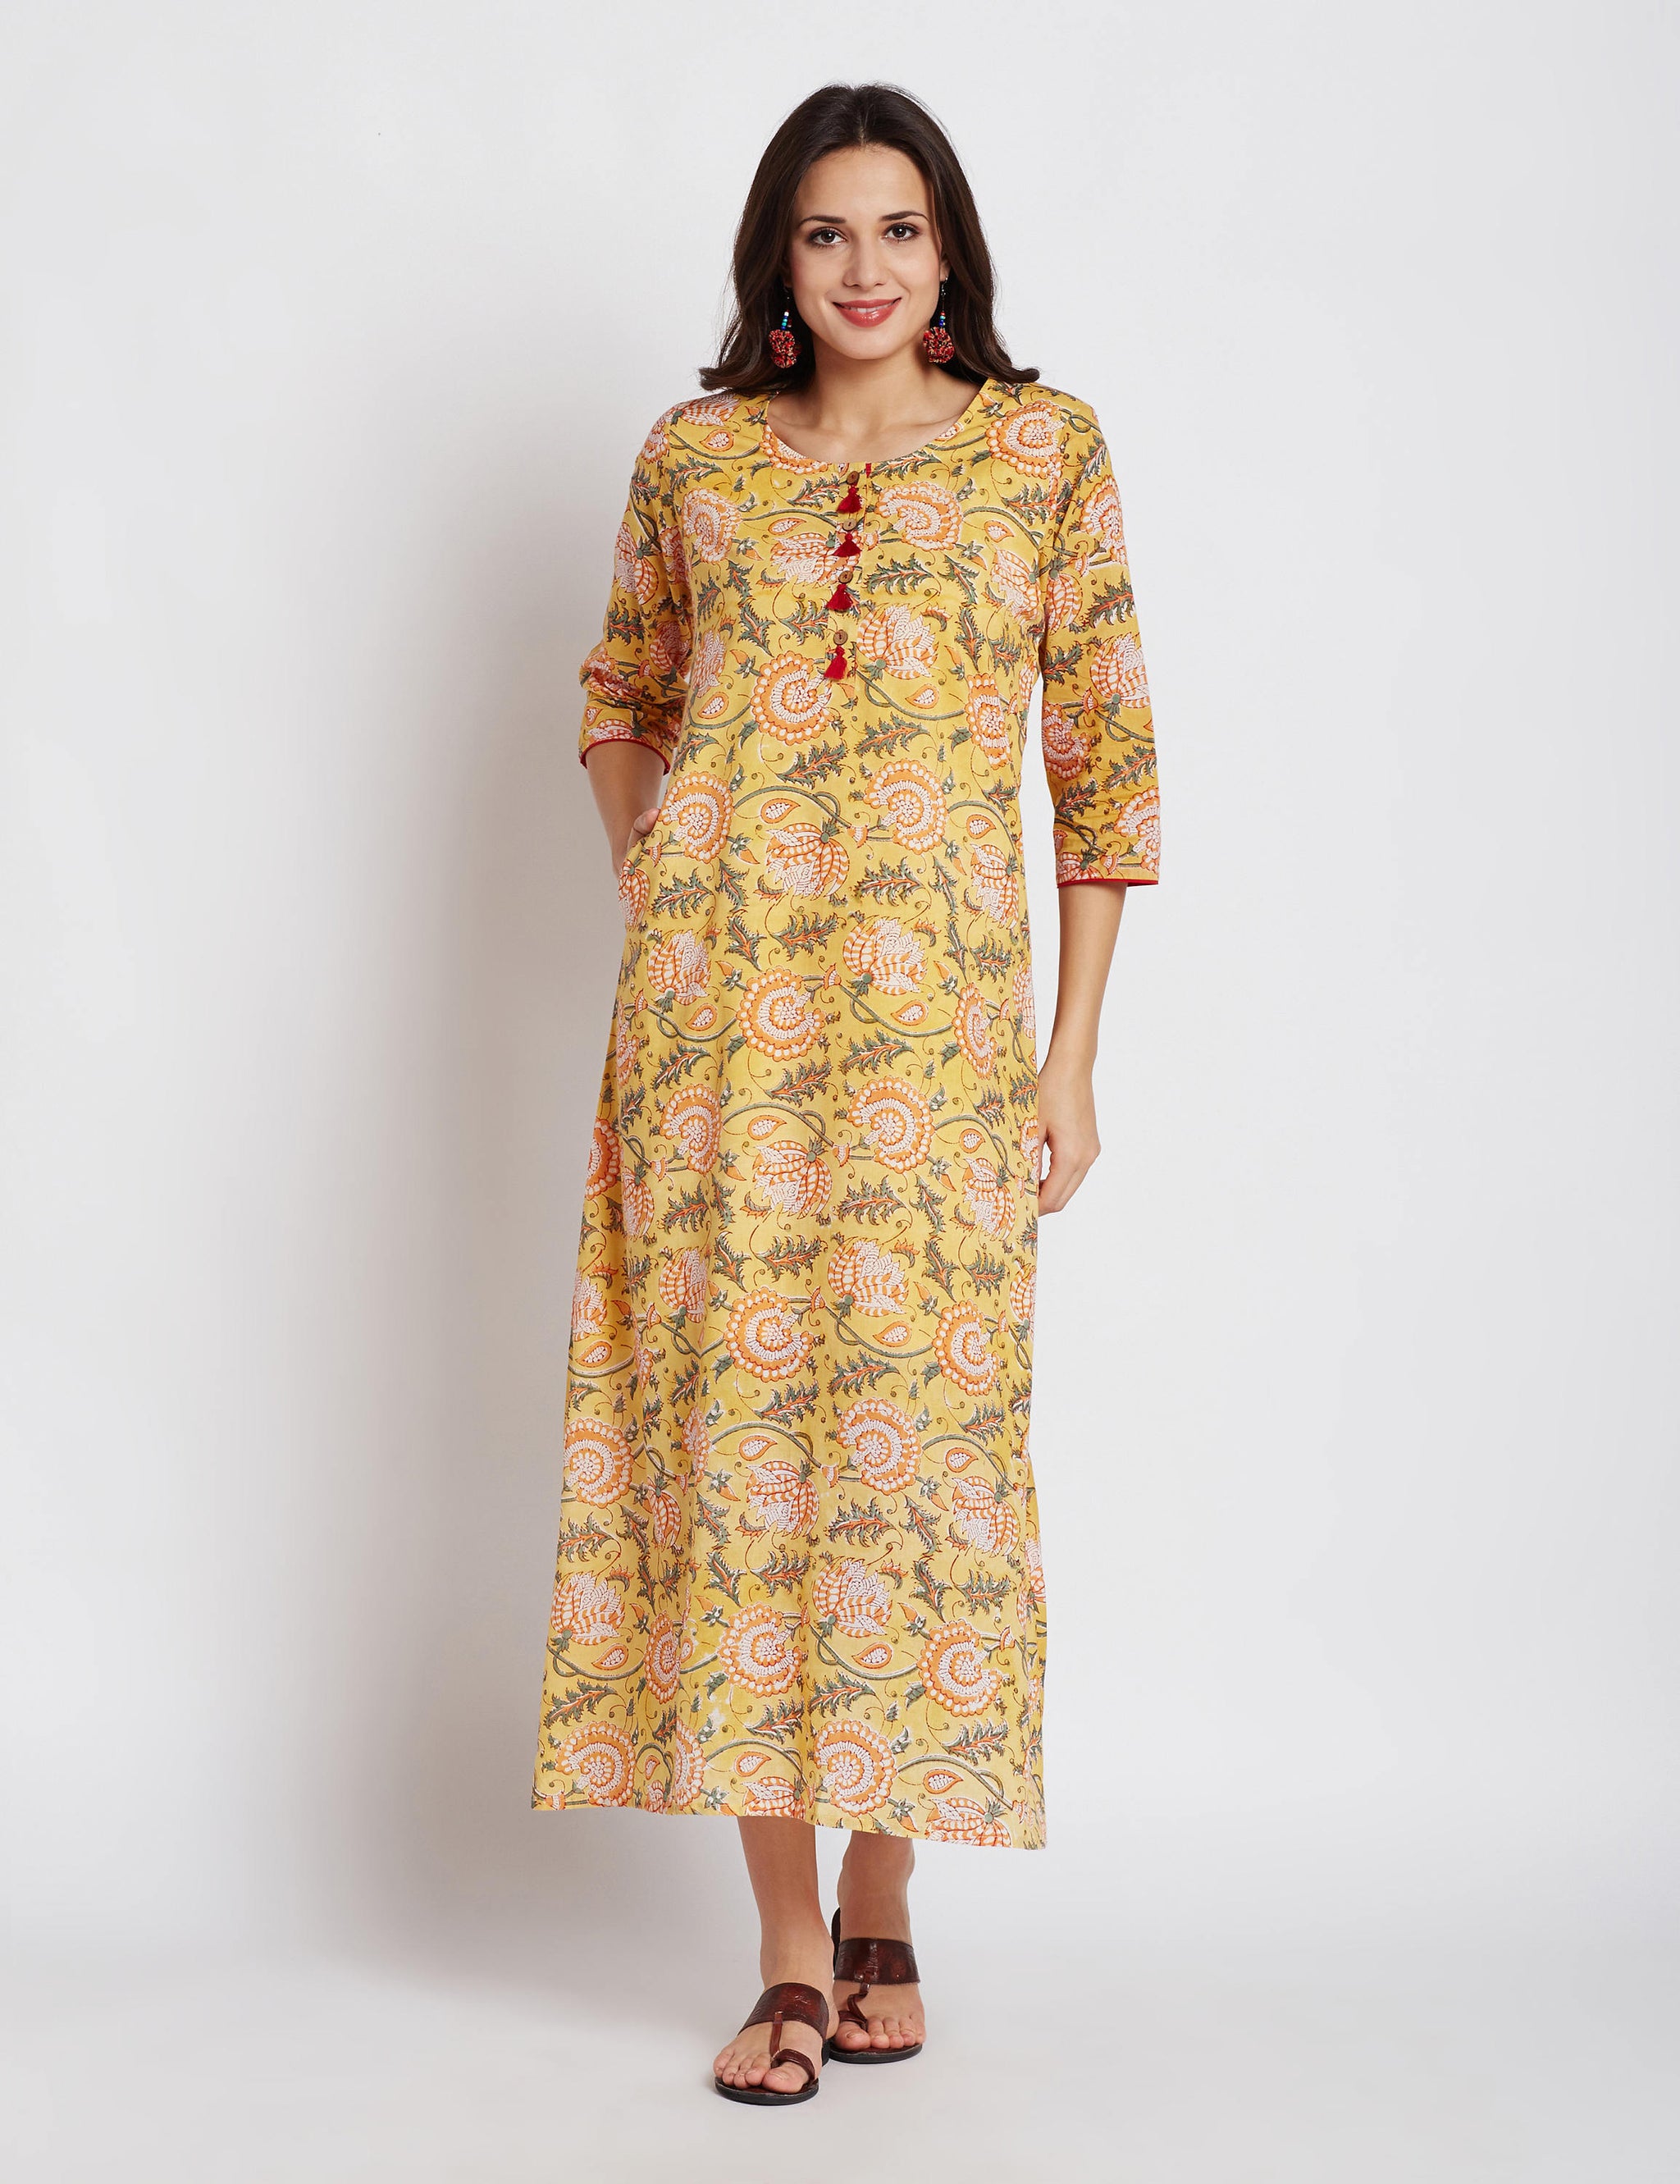 Hand block yellow floral printed one piece long dress